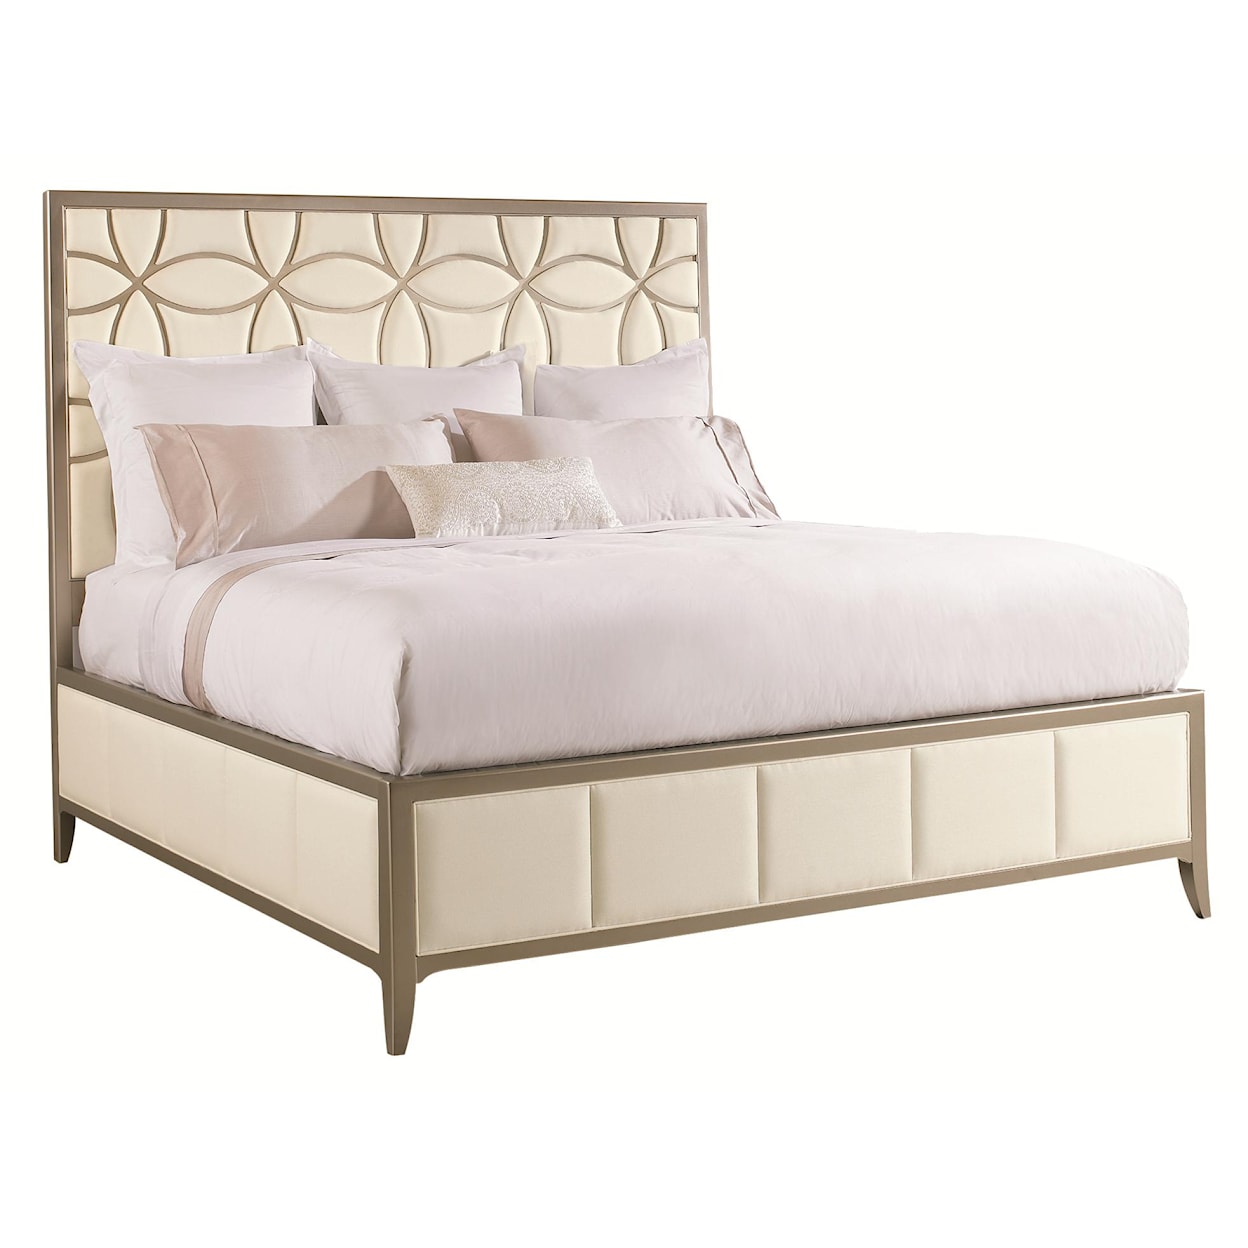 Caracole Classic Contemporary King Size Sleeping Beauty Bed